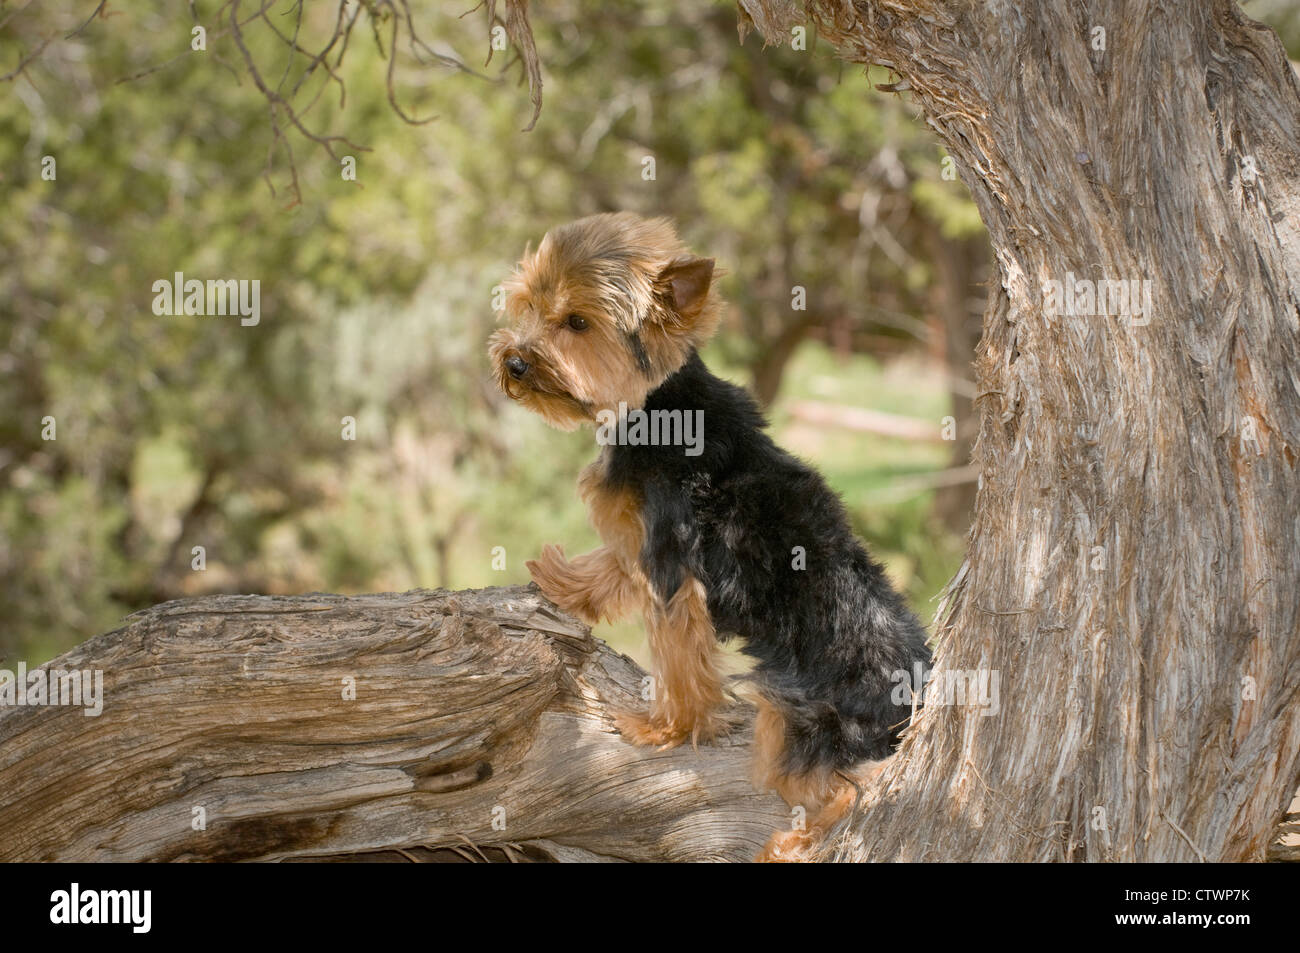 Yorkshire Terrier standing in tree Banque D'Images